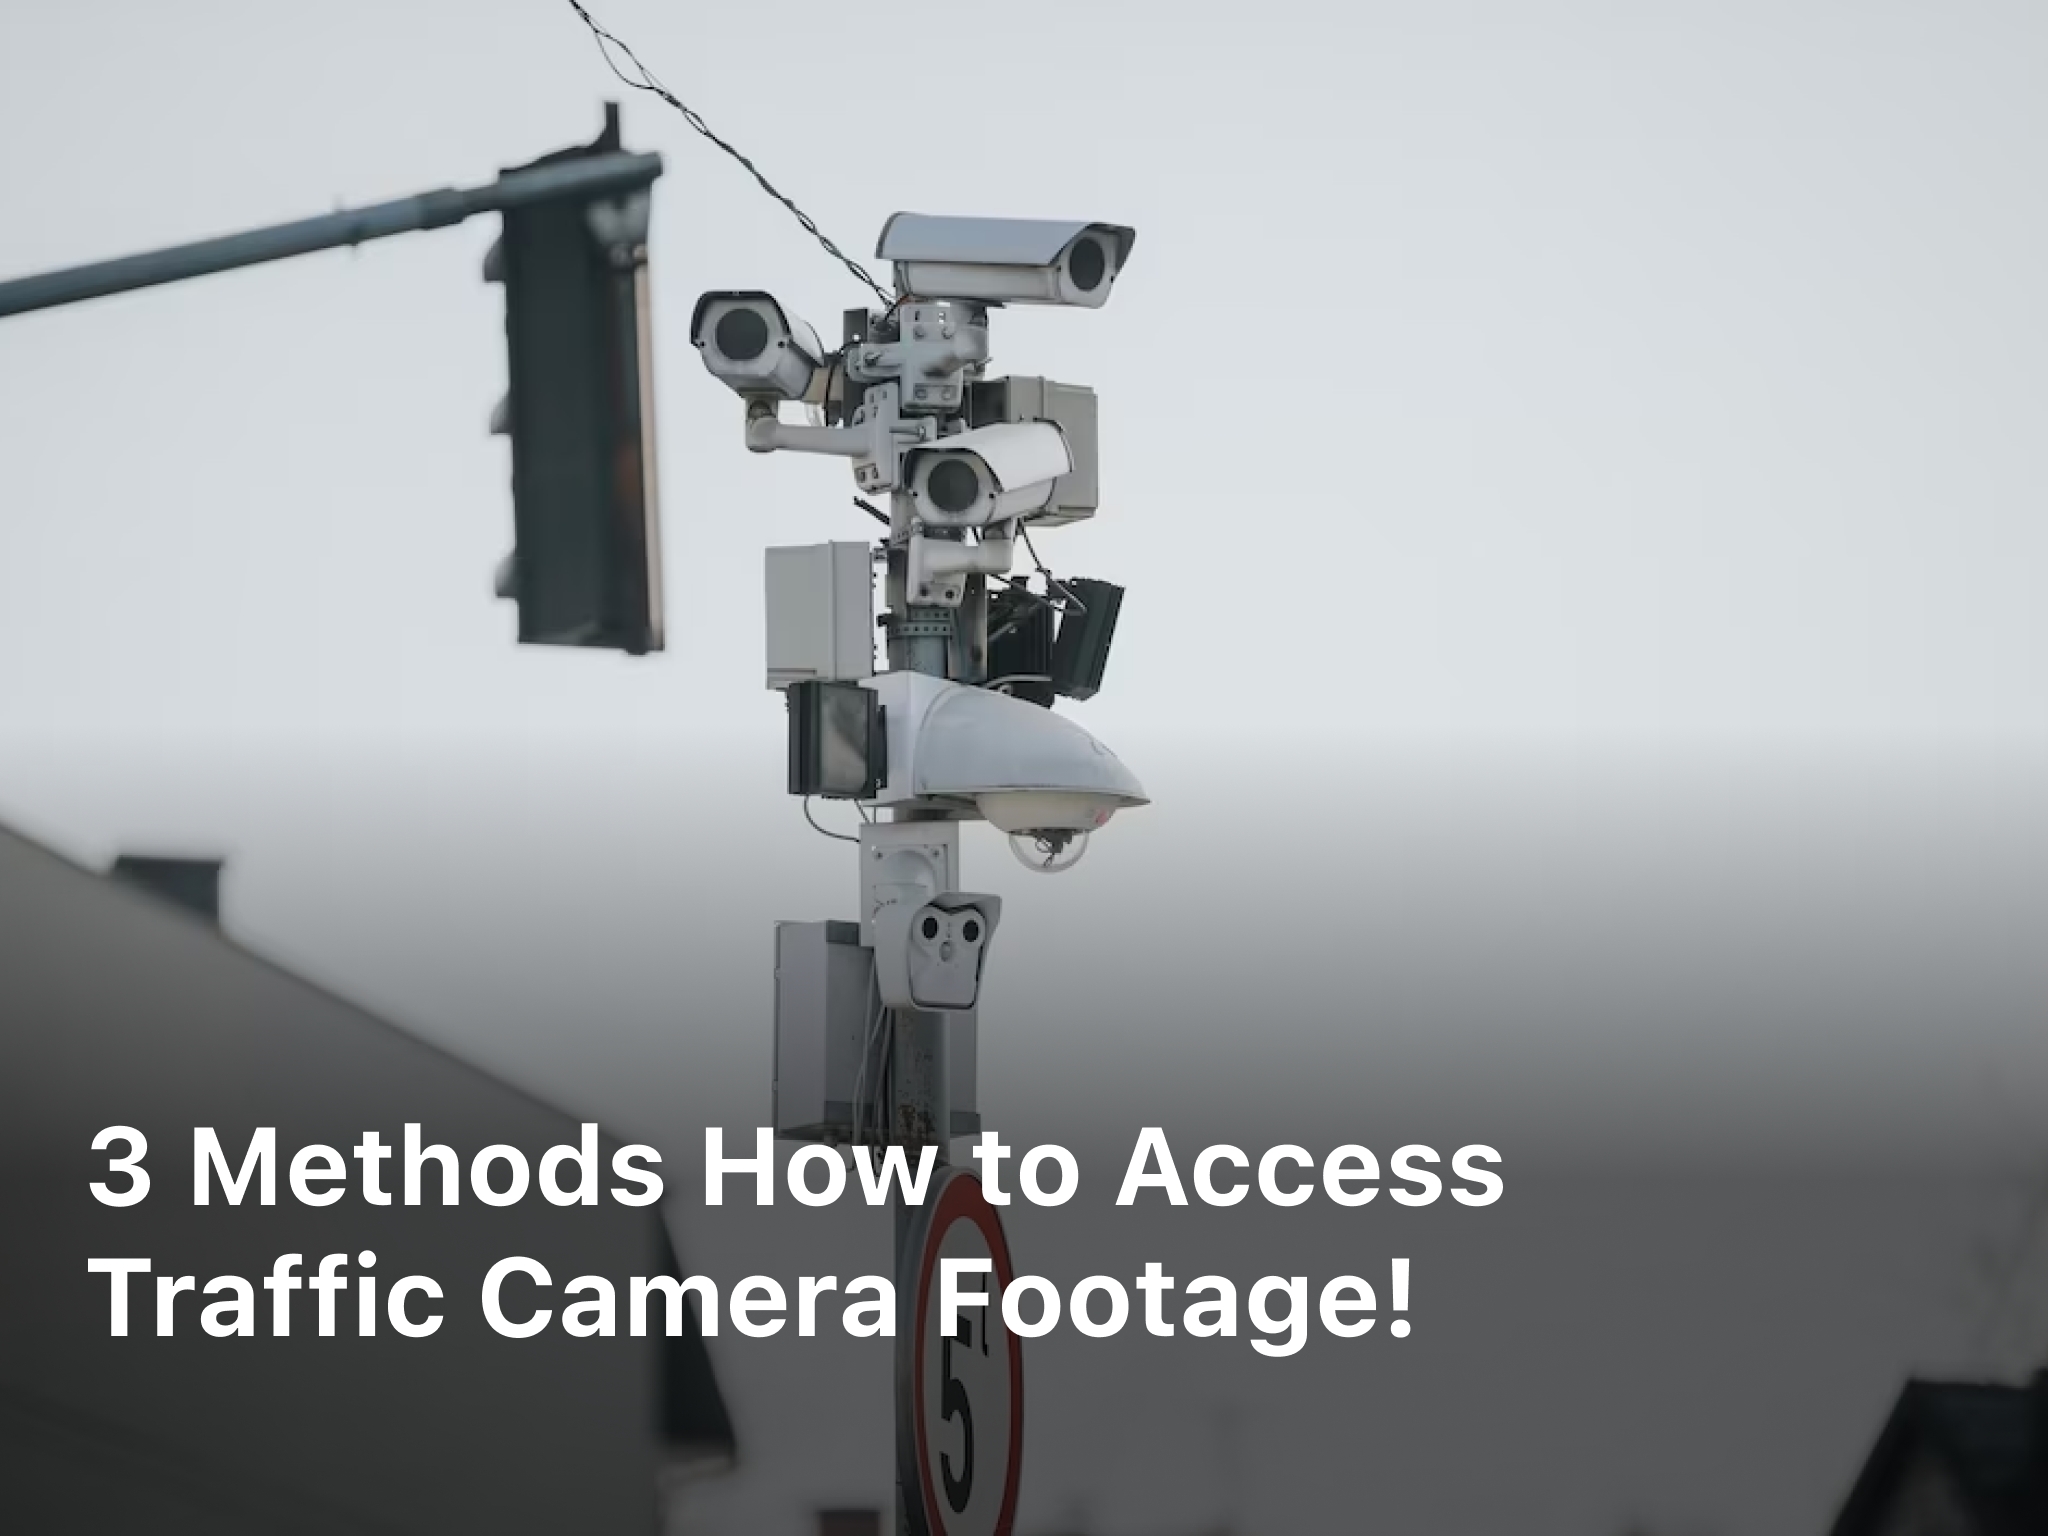 How to Access Traffic Camera Footage